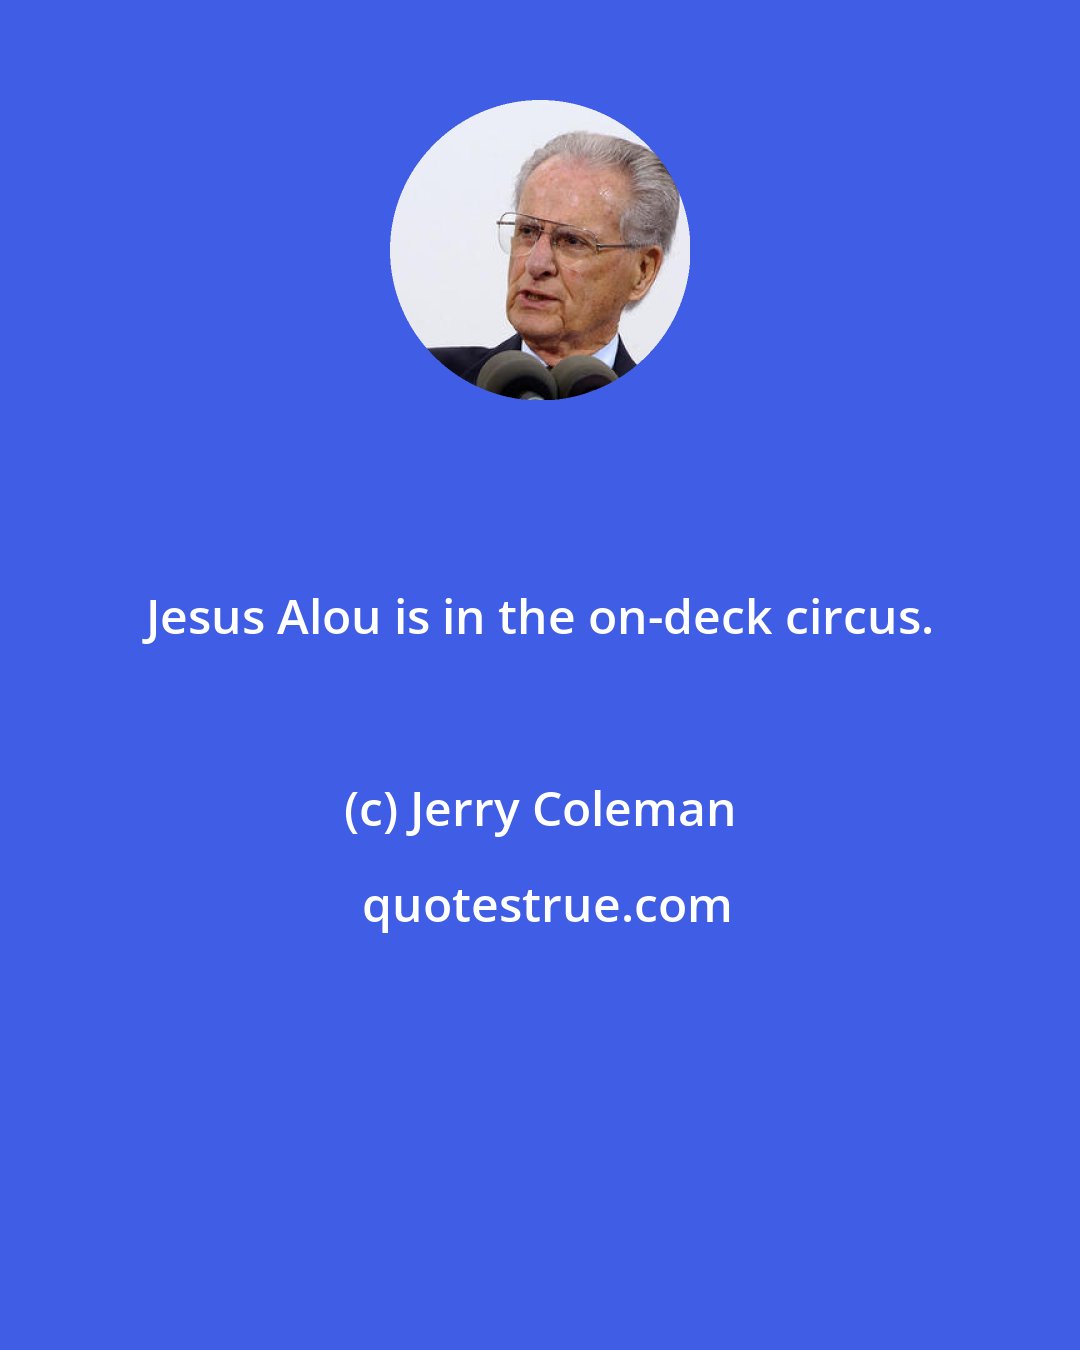 Jerry Coleman: Jesus Alou is in the on-deck circus.